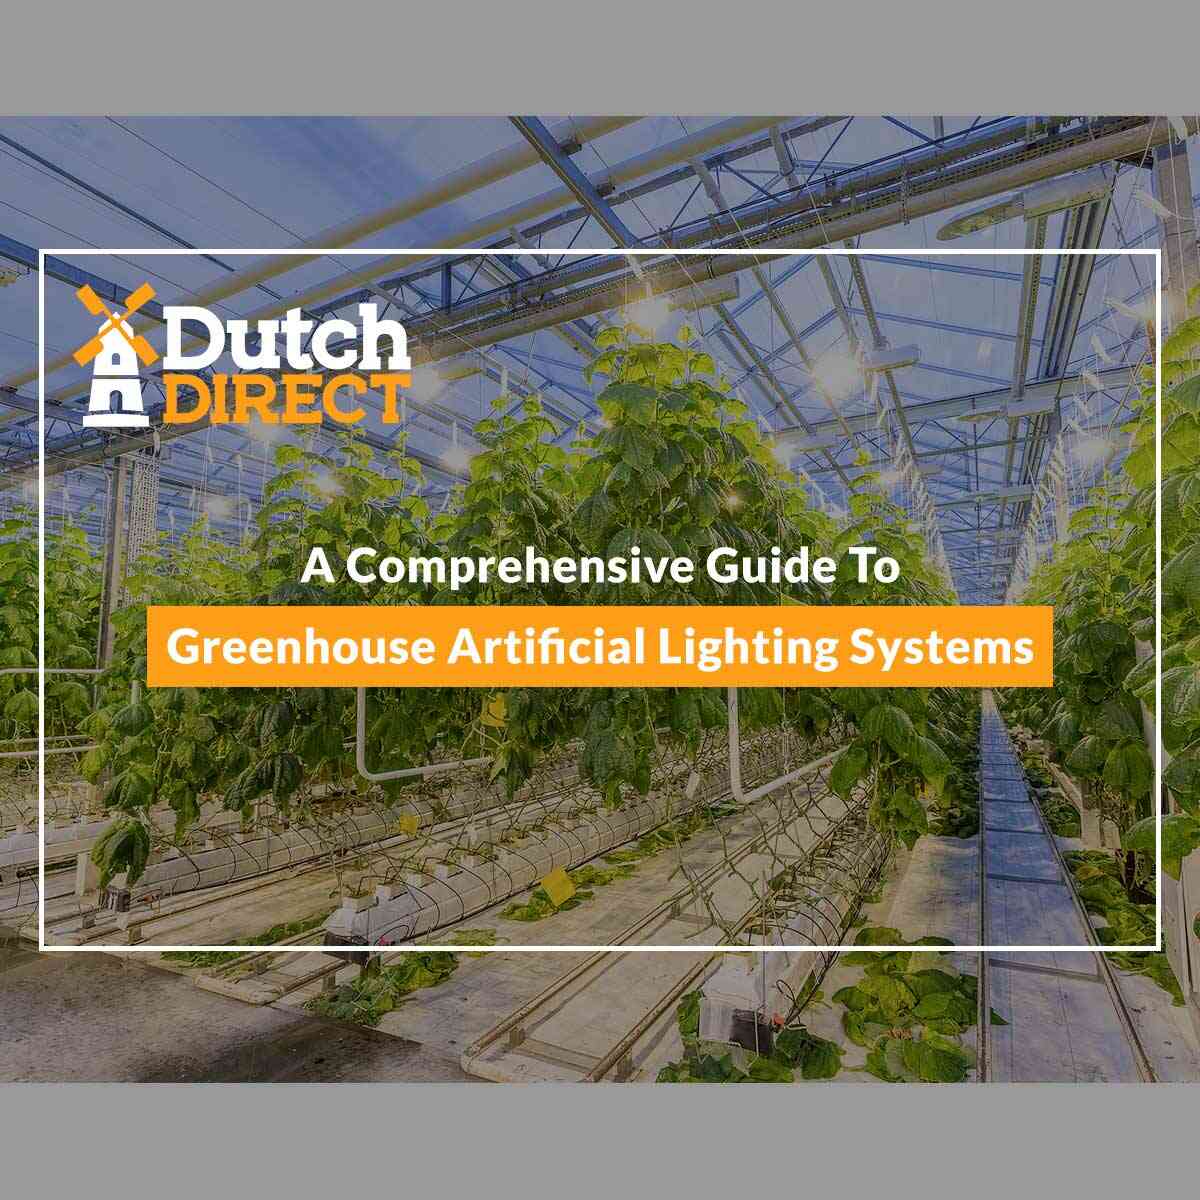 A Comprehensive Guide To Greenhouse Artificial Lighting Systems